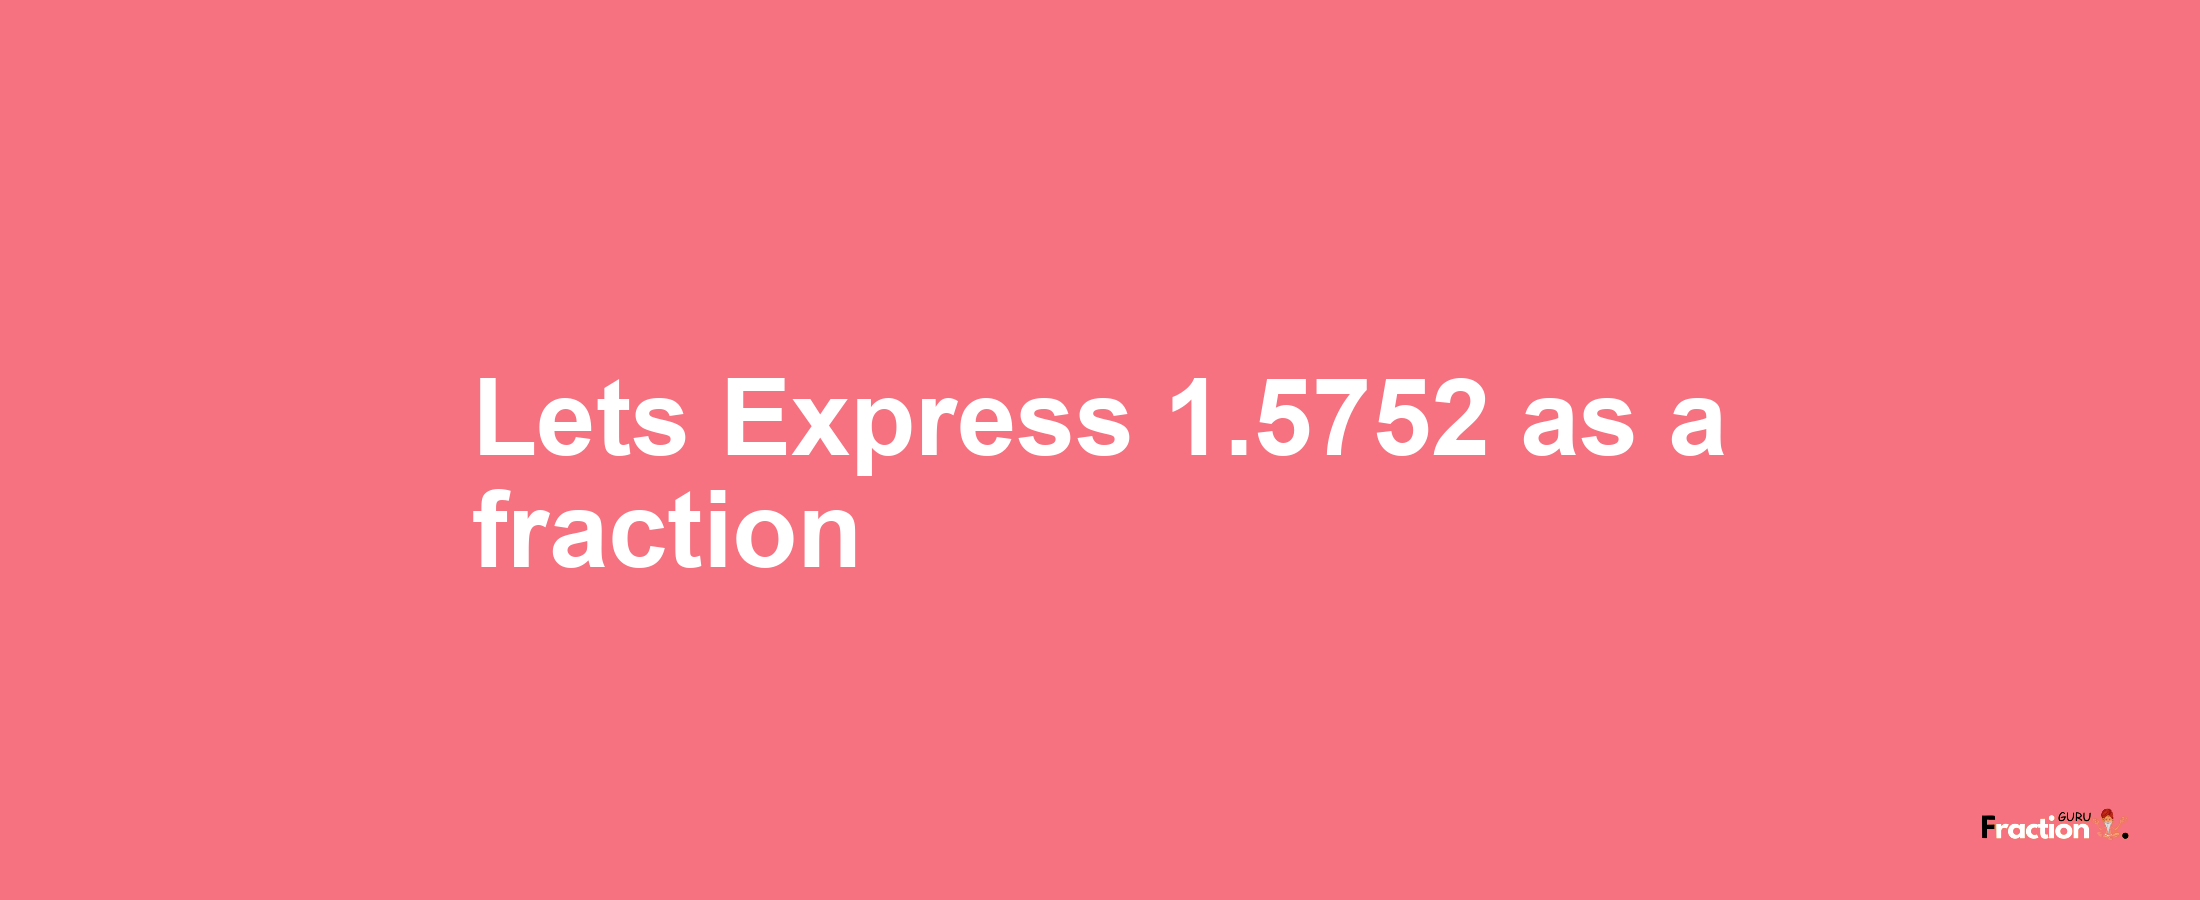 Lets Express 1.5752 as afraction